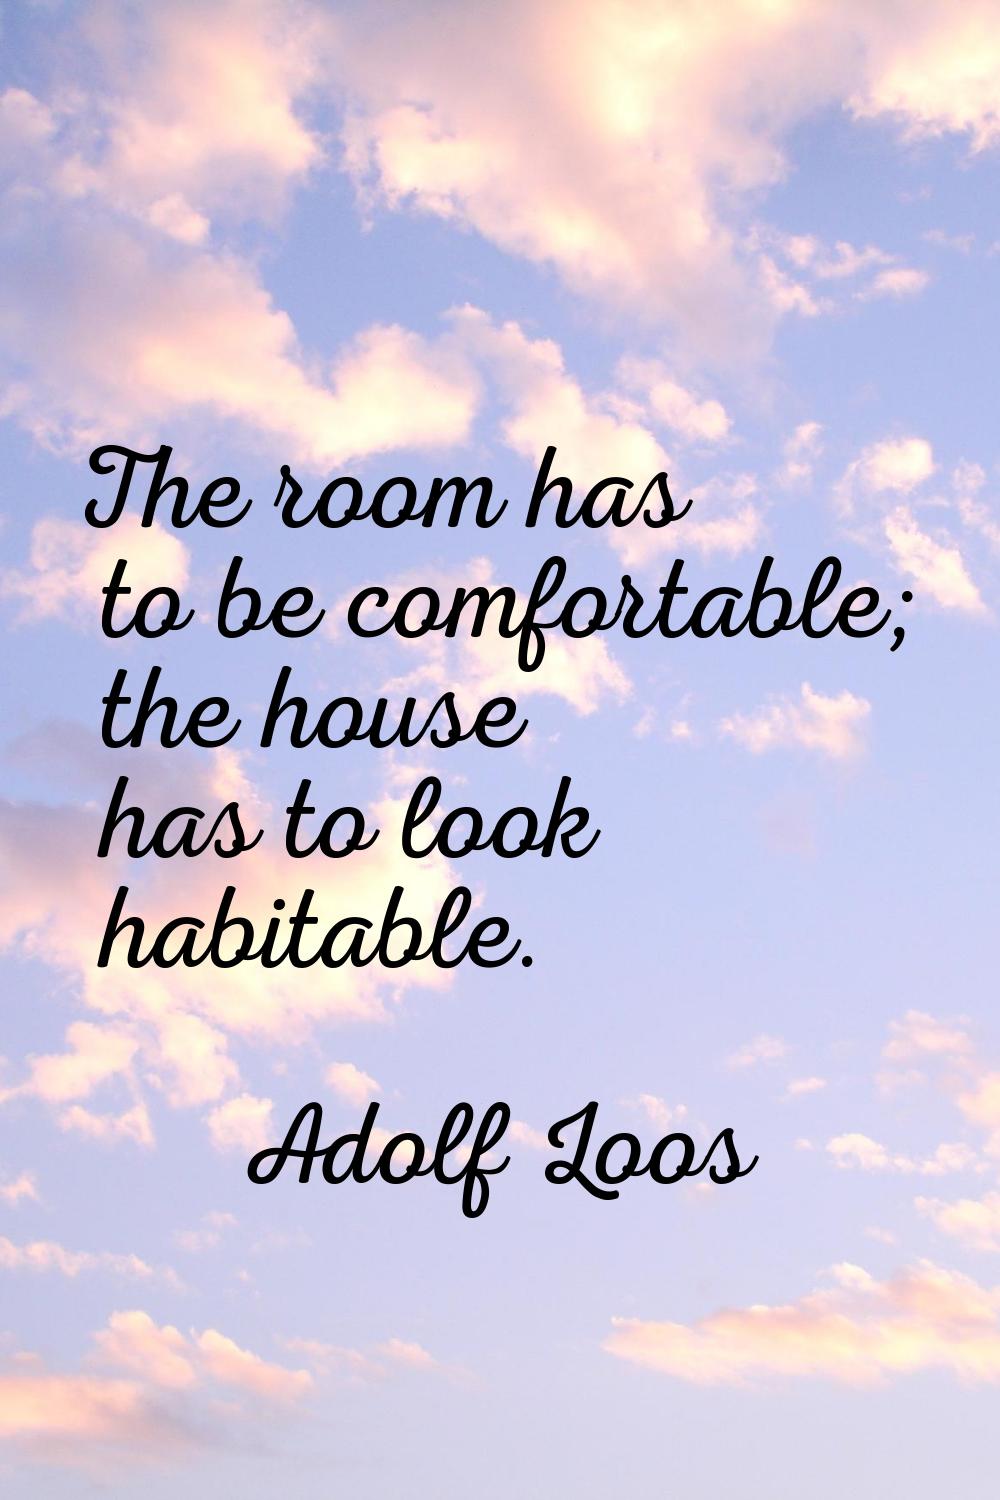 The room has to be comfortable; the house has to look habitable.